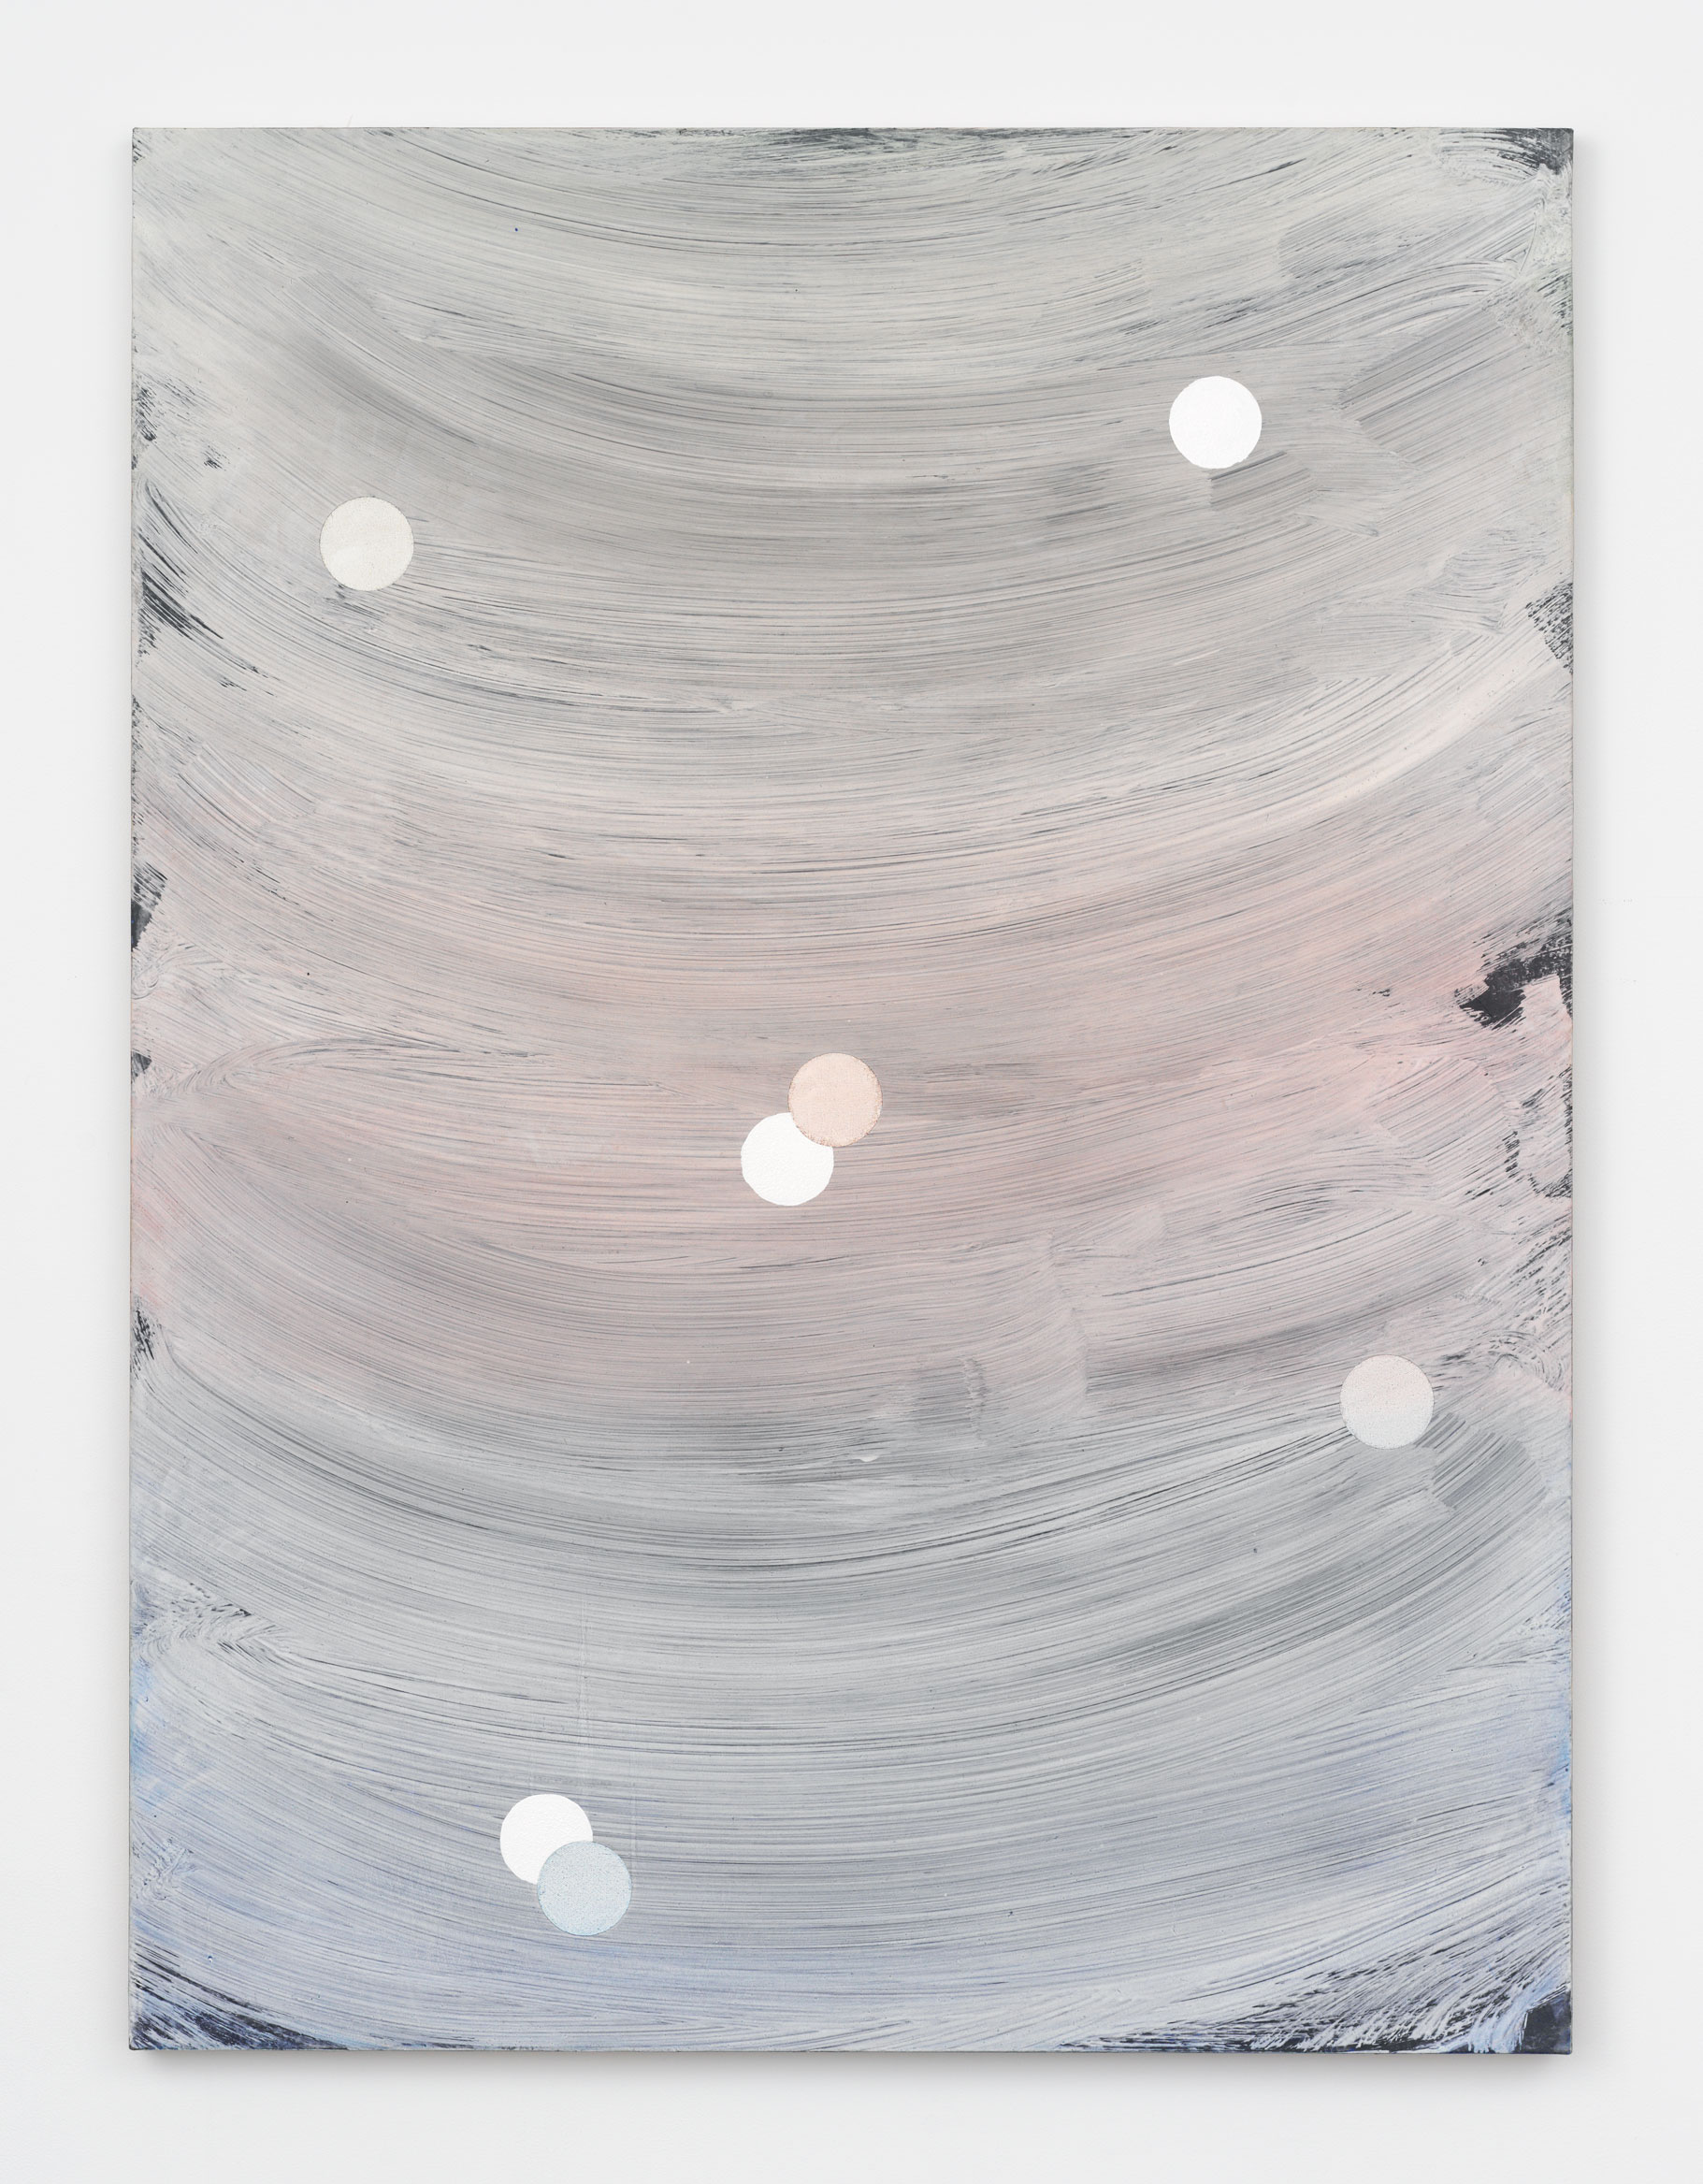 Alex Kwartler, Untitled, 2019, oil and plaster on canvas, 48h x 36w in.